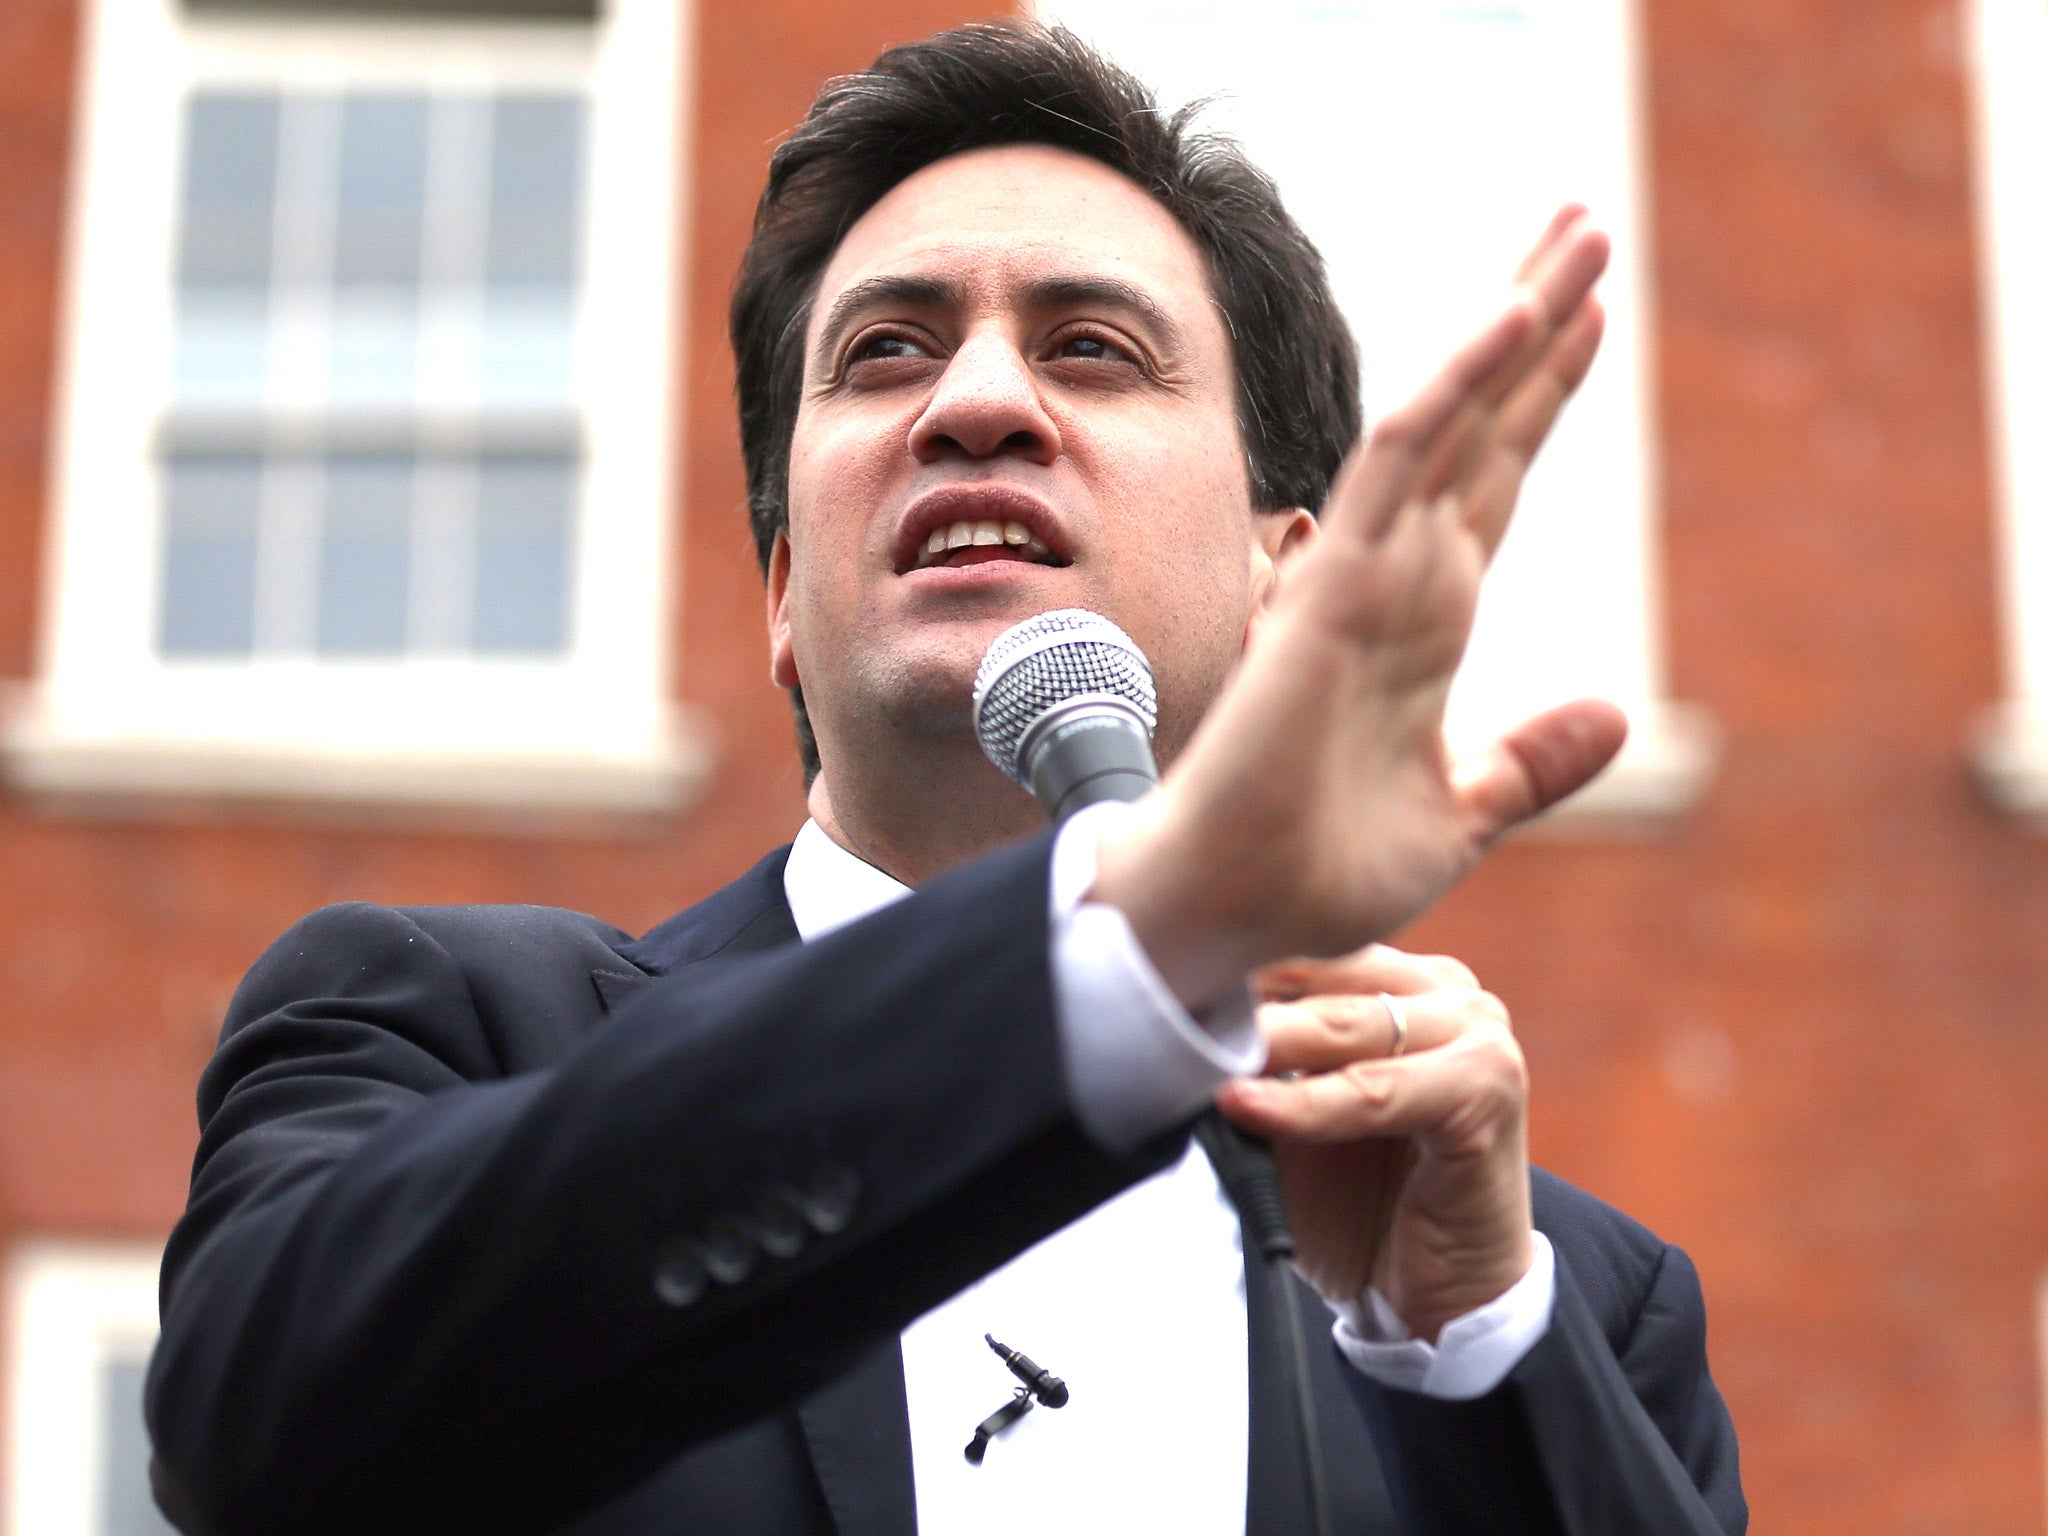 Ed Miliband will pledge to restore the 'contributory principle' to the welfare state